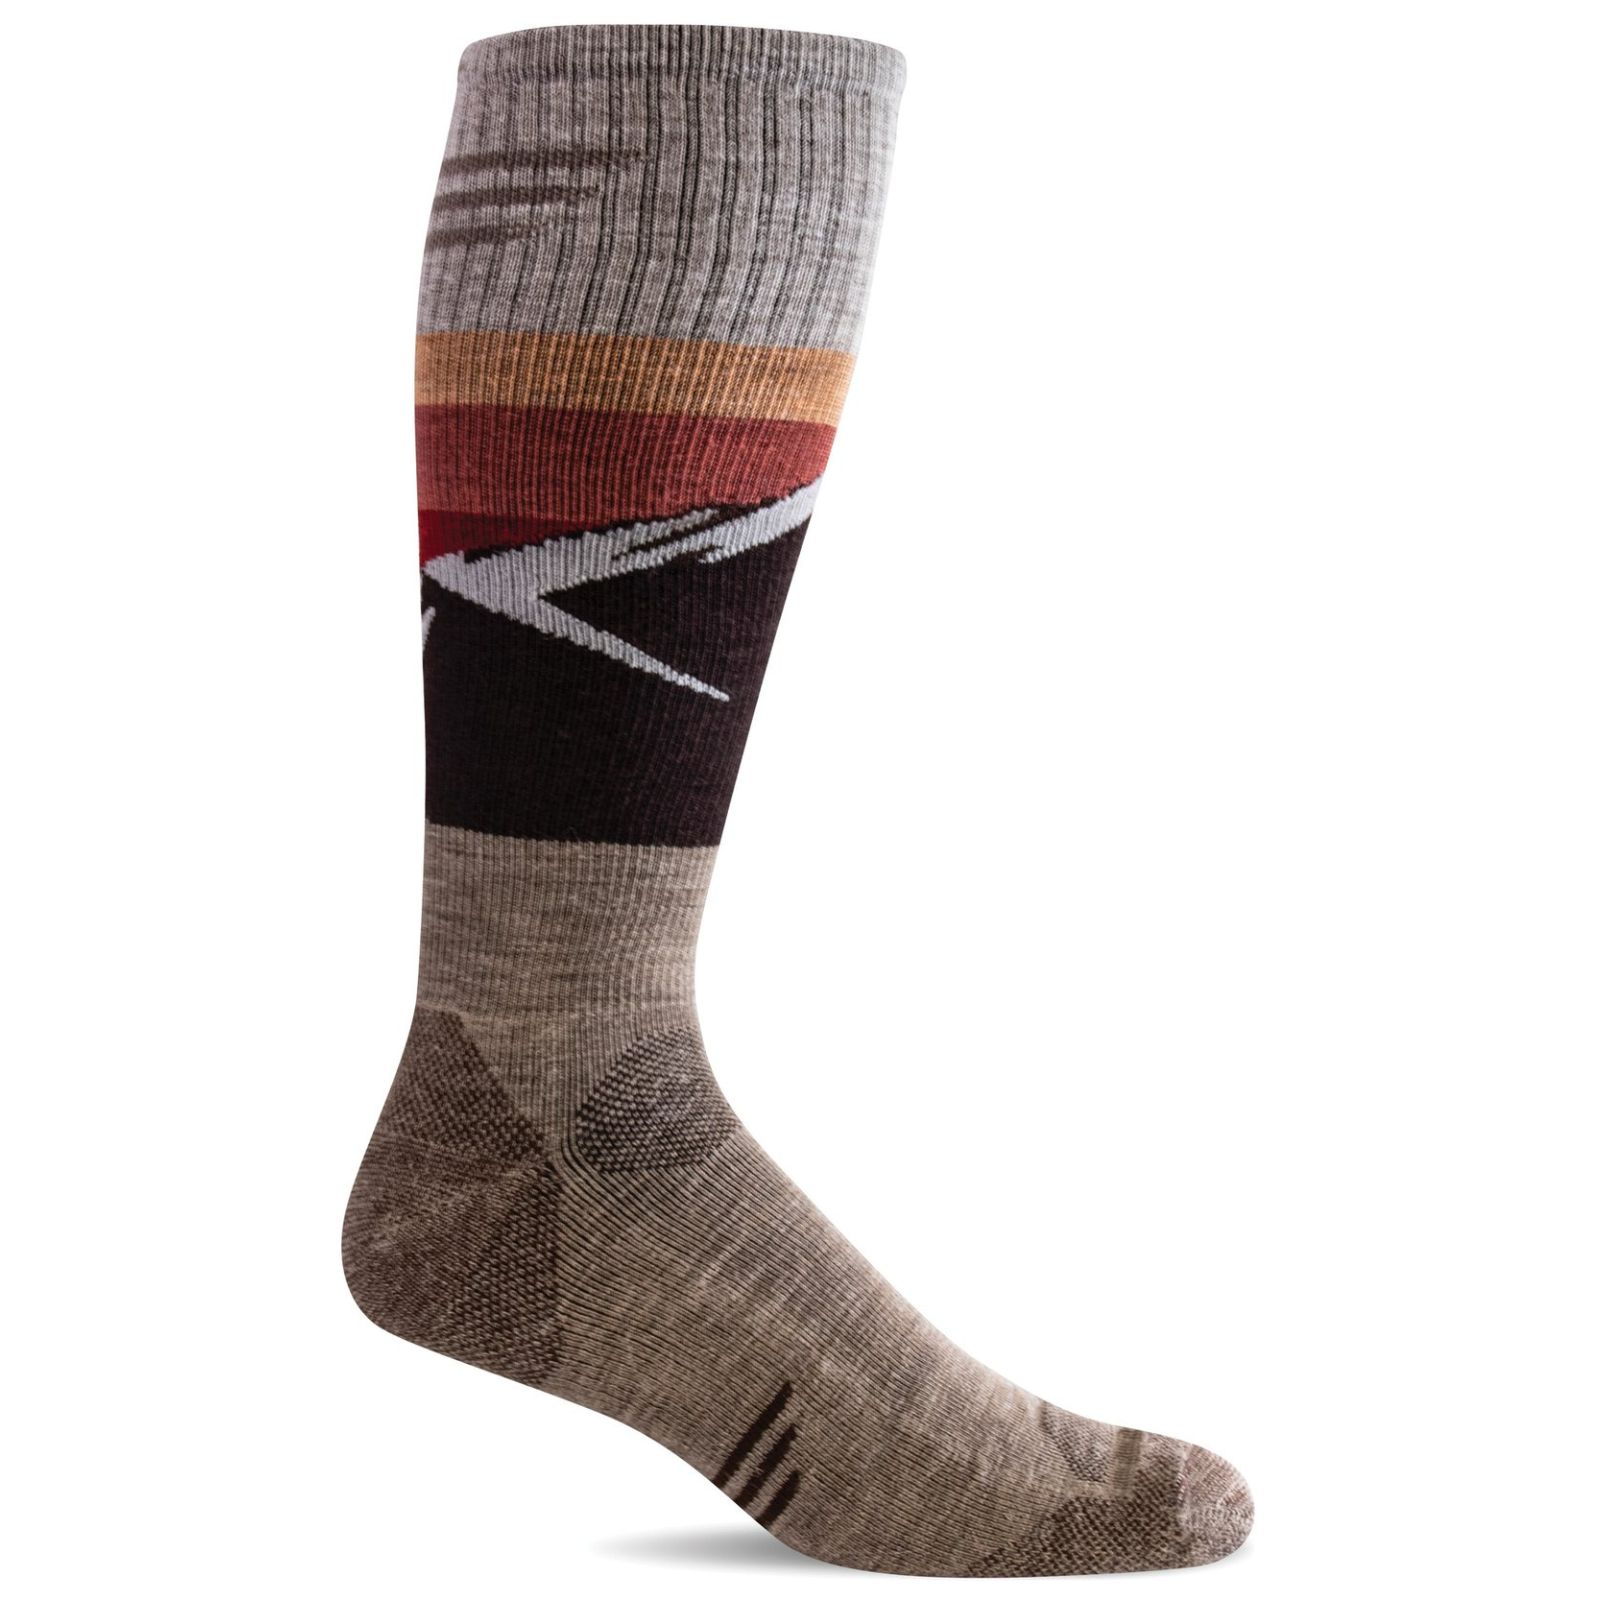 Sockwell Modern Mountain OTC moderate graduated compression (15-20 mmHg) brown knee high men's sock featuring mountain image